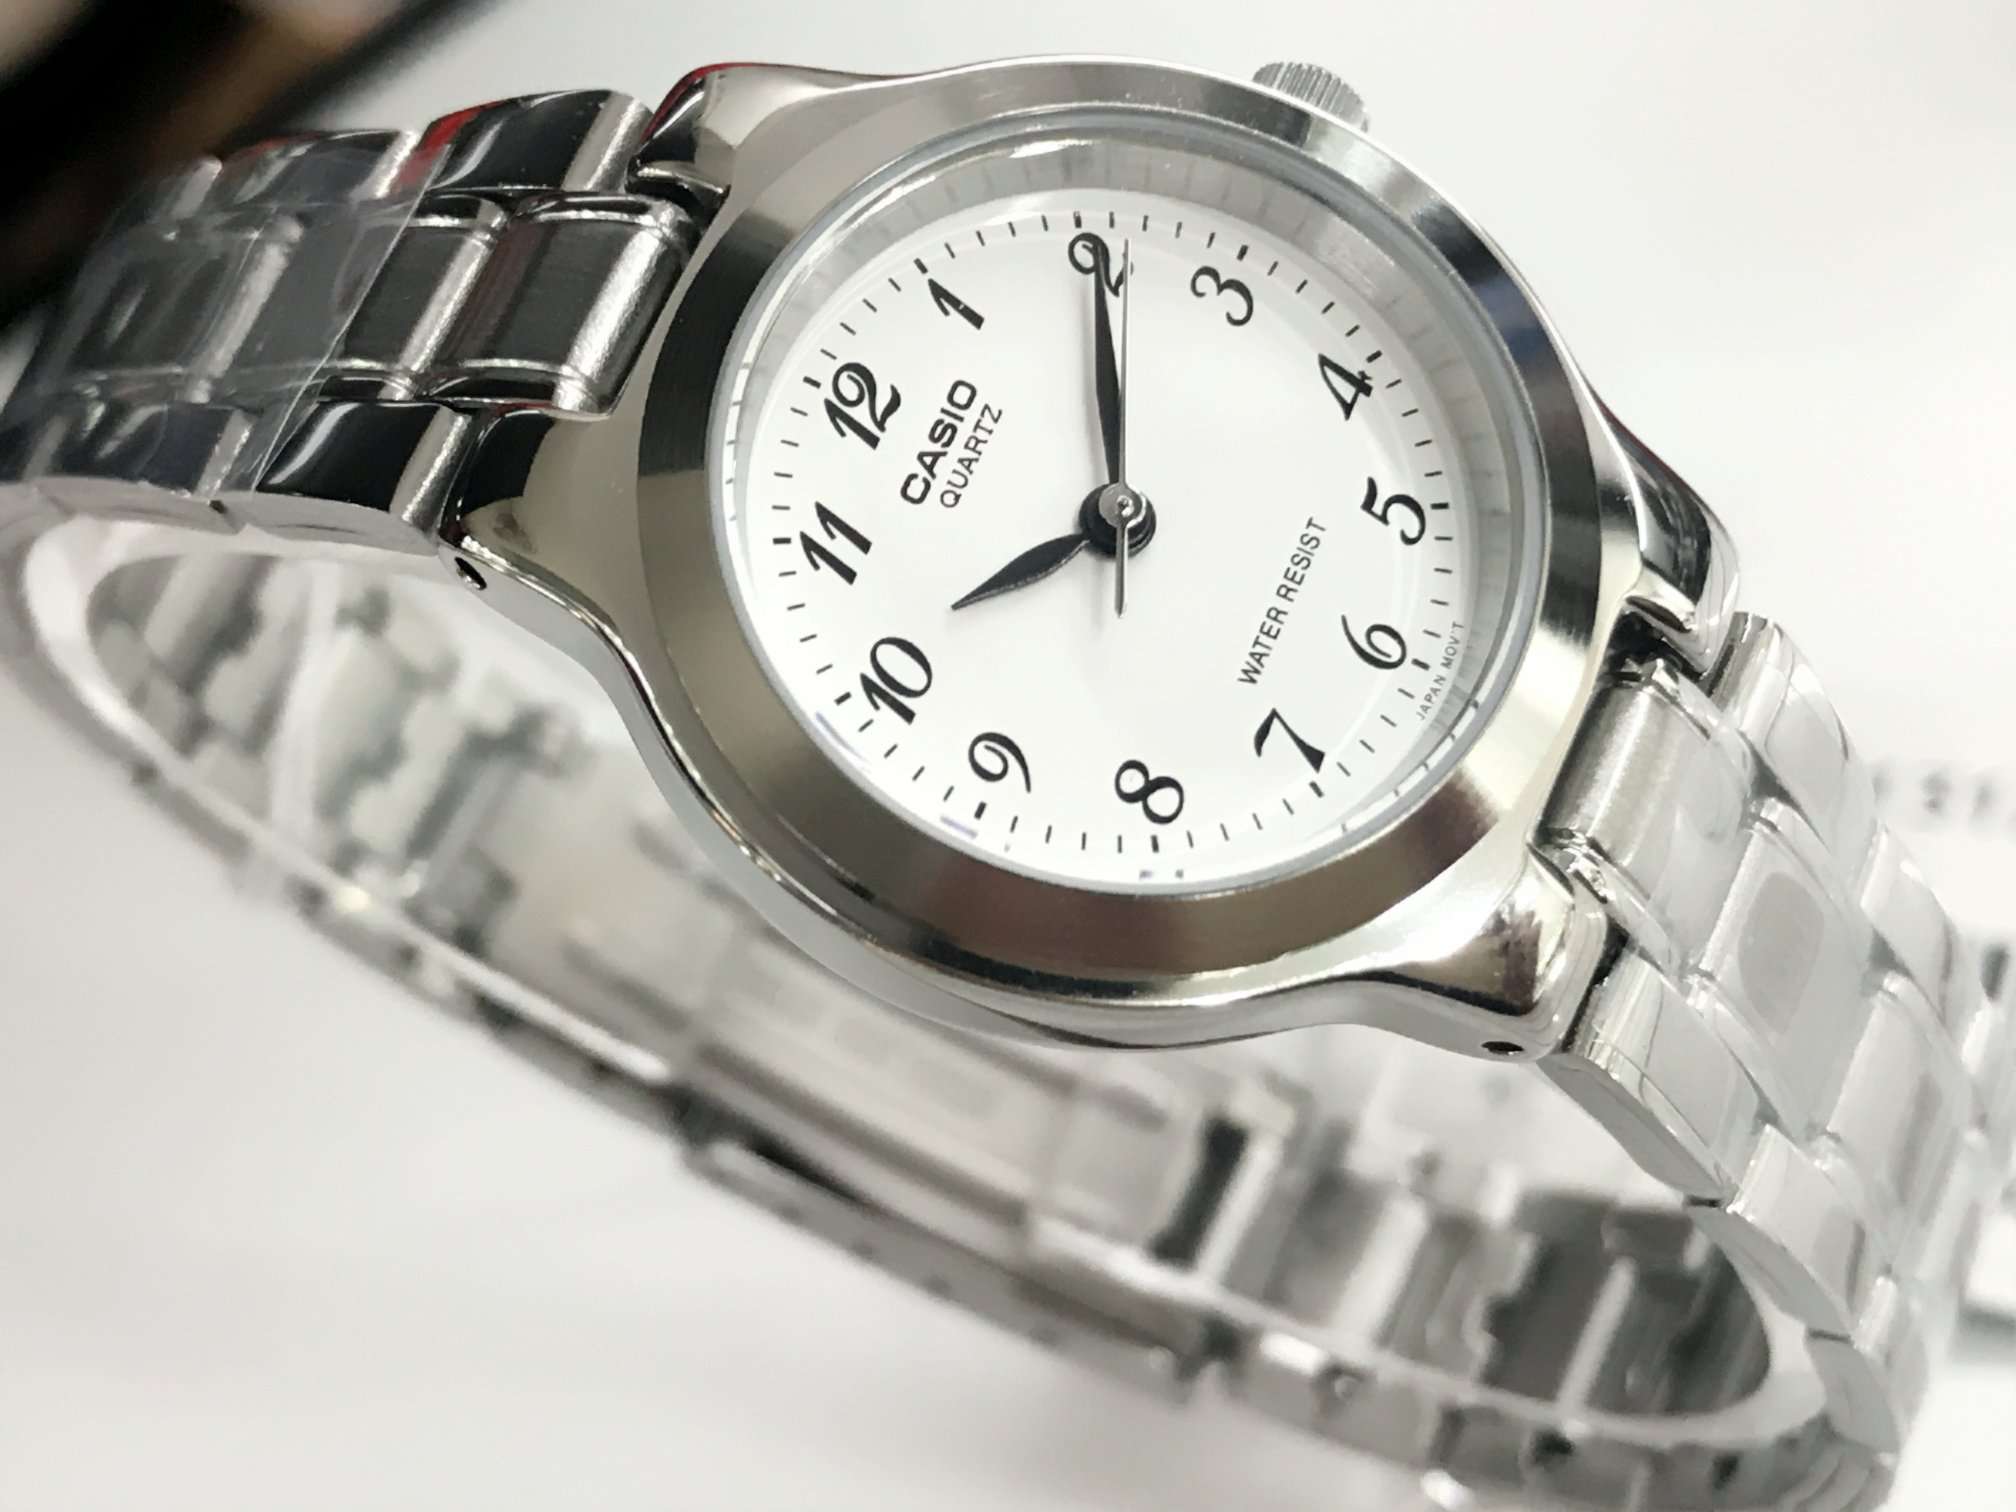 Casio Vintage LTP-1131A-7BRDF Silver Stainless Watch for Women-Watch Portal Philippines